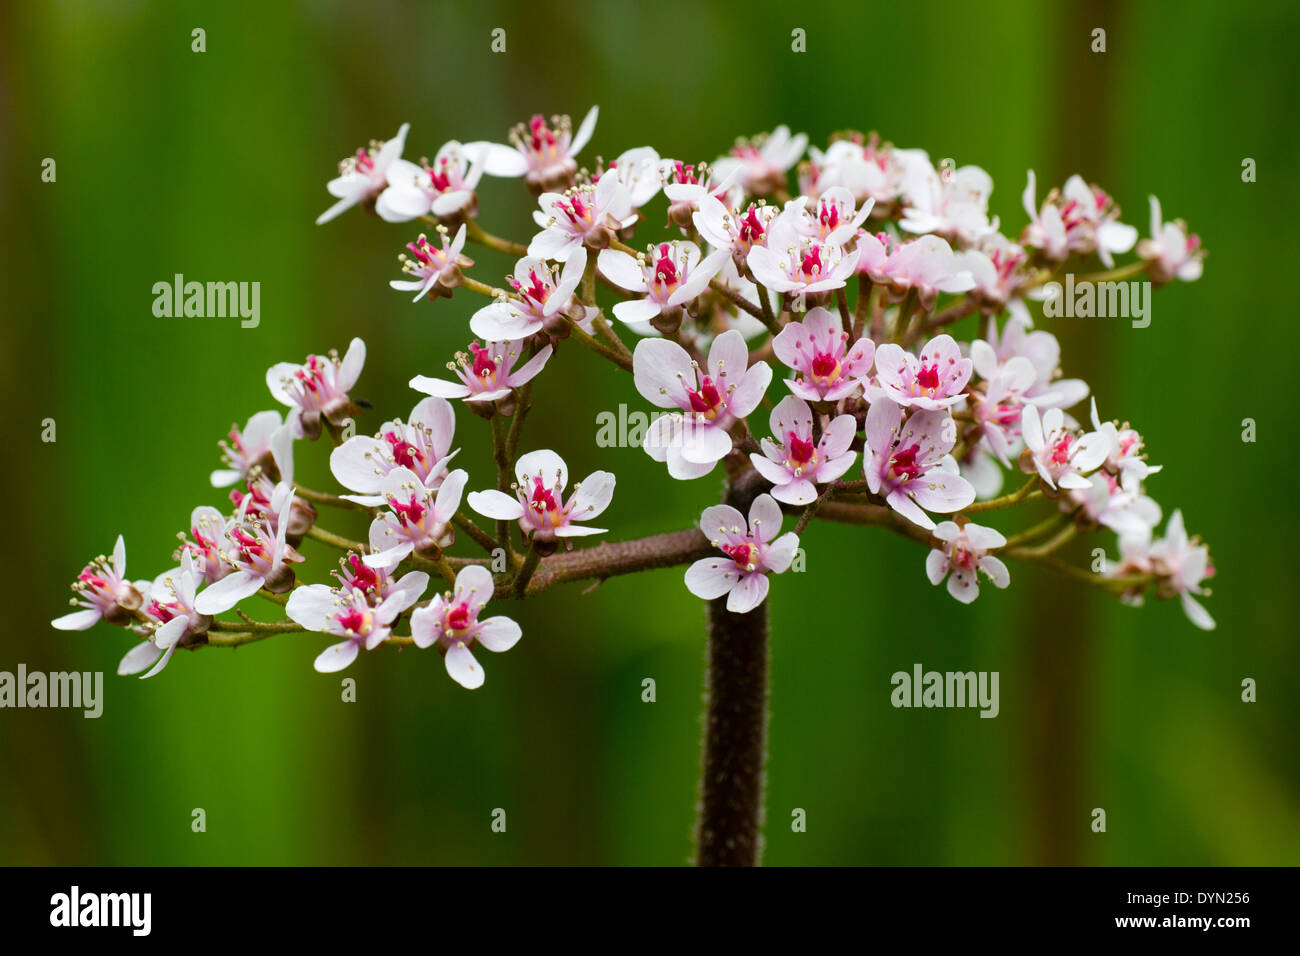 Spring flowers of the large leaved waterside plant, Darmera peltata, emerge before the foliage Stock Photo